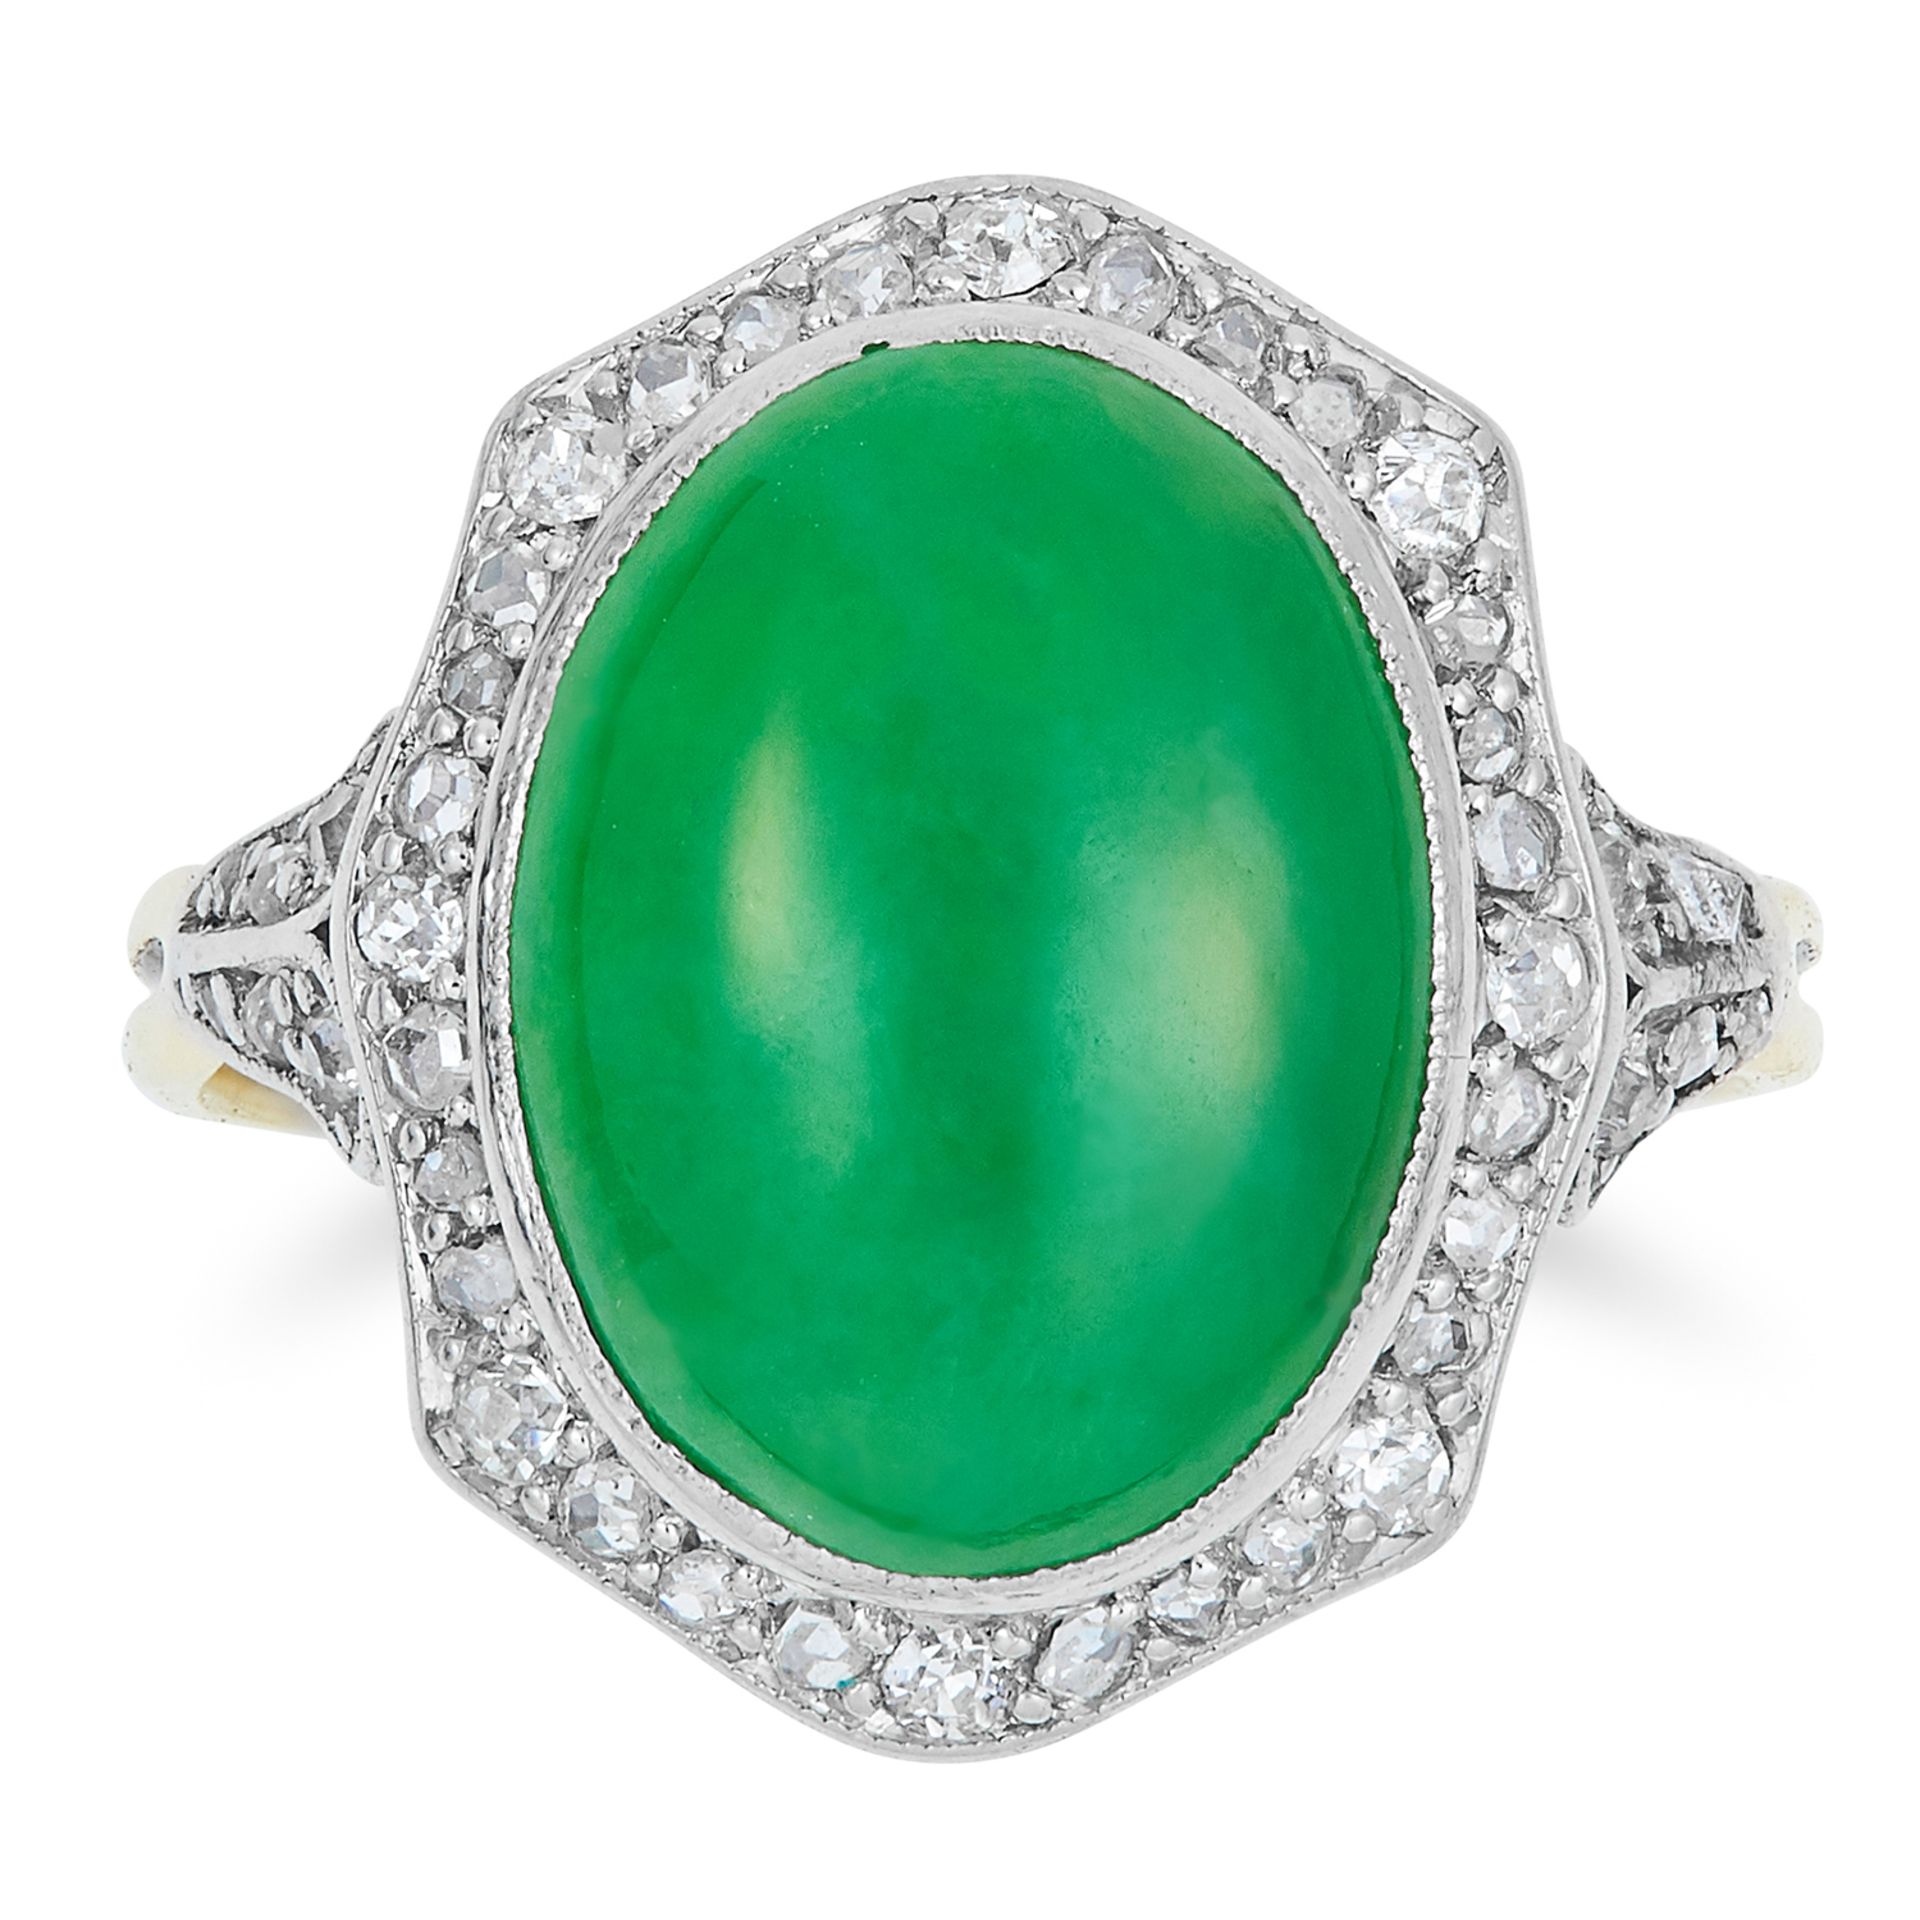 ART DECO JADE RING, set with a cabochon jade within a border of diamonds, size N / 6.5, 3.9g.